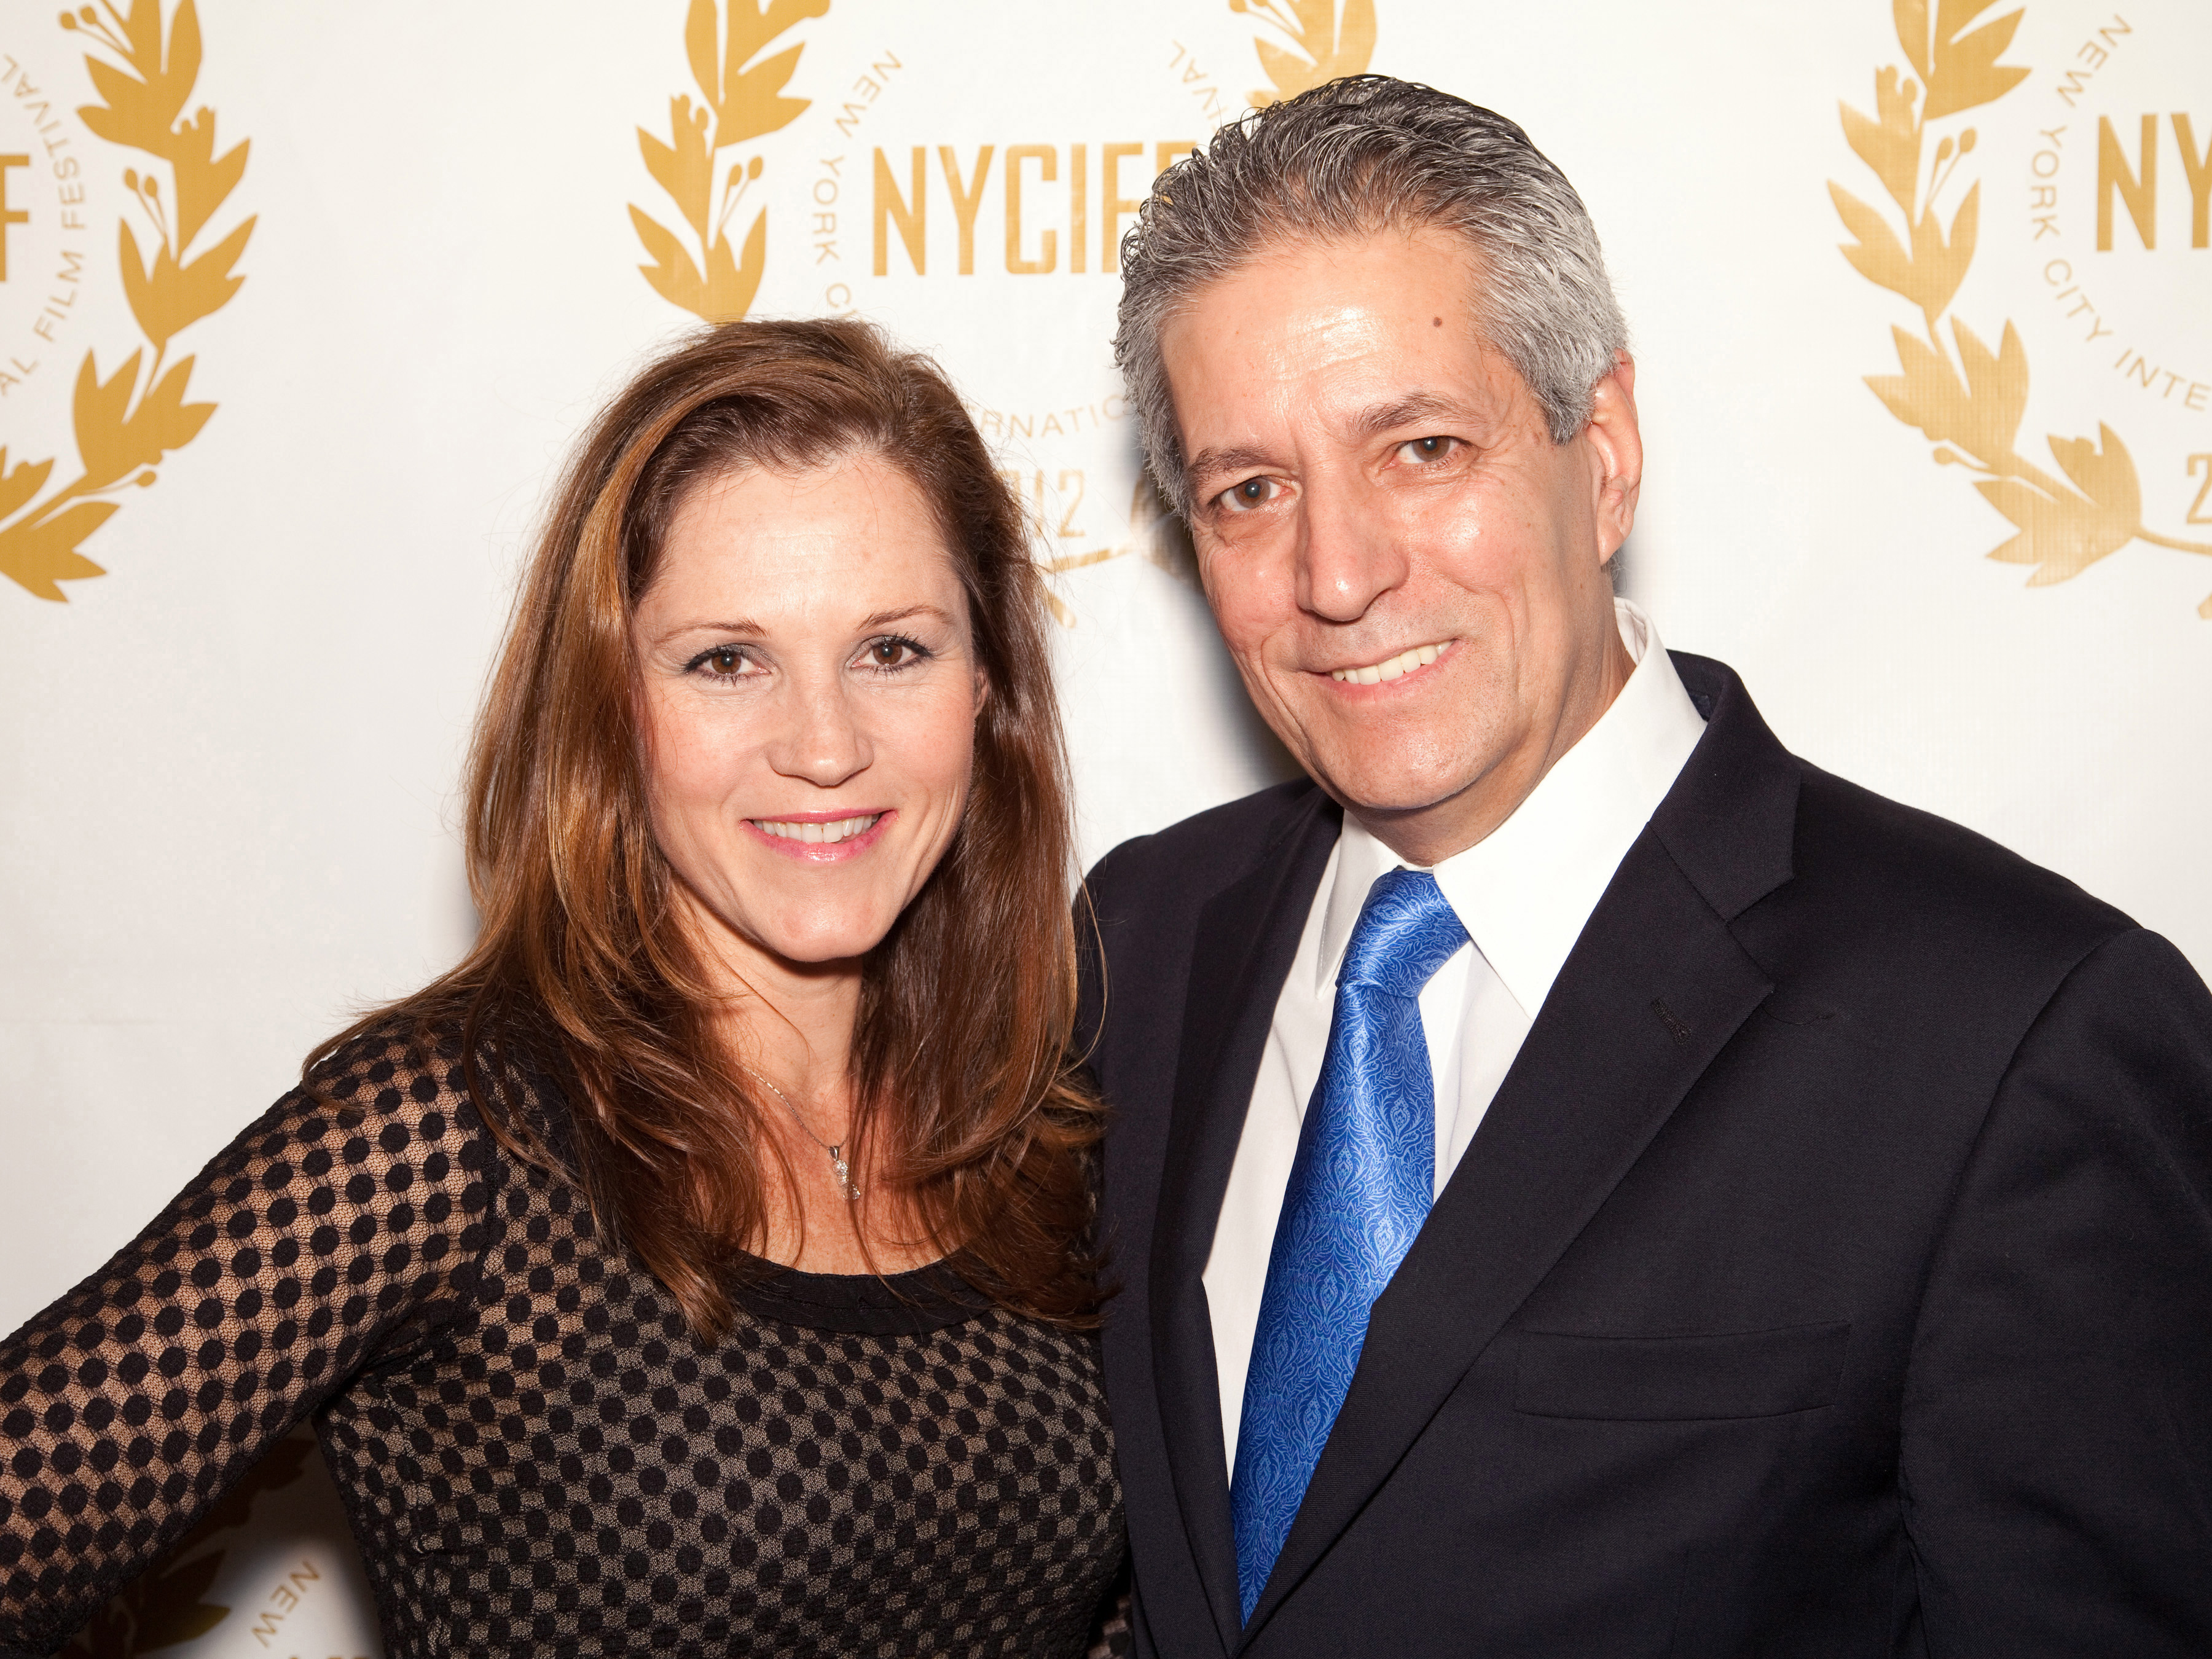 On the Red Carpet with NYCIFF founder Roberto Rizzo as a best Actress nominee at the NYCIFF Awards Night Ceremony